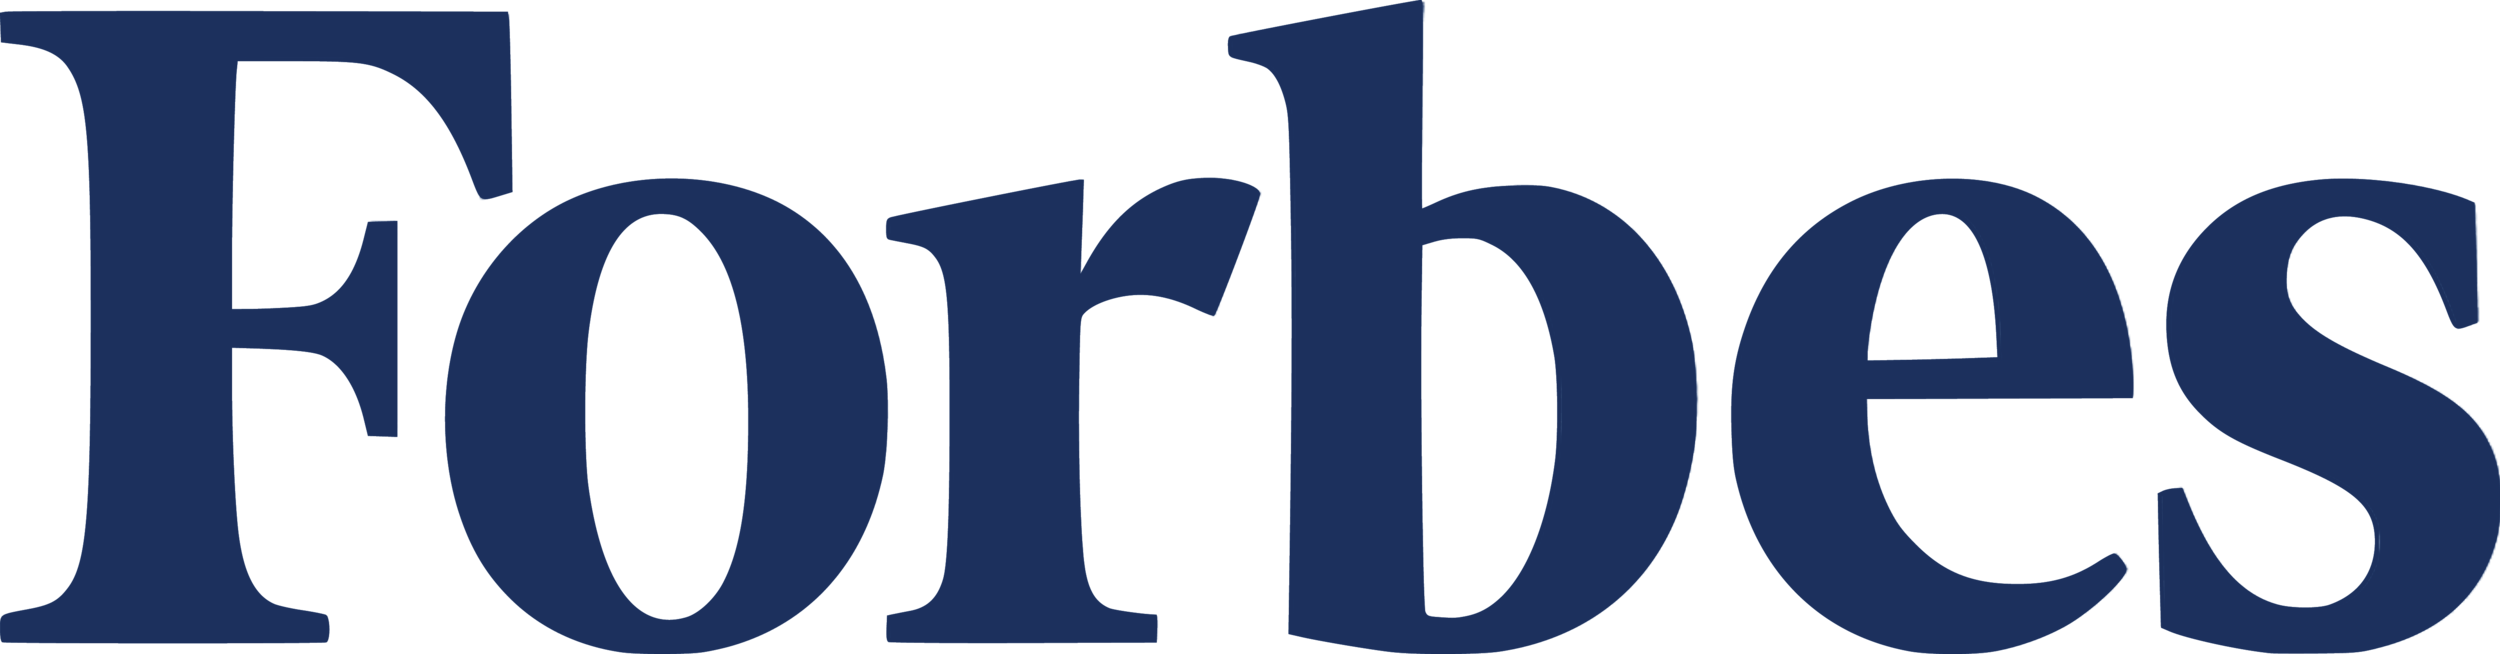 Forbes_logo-1.png